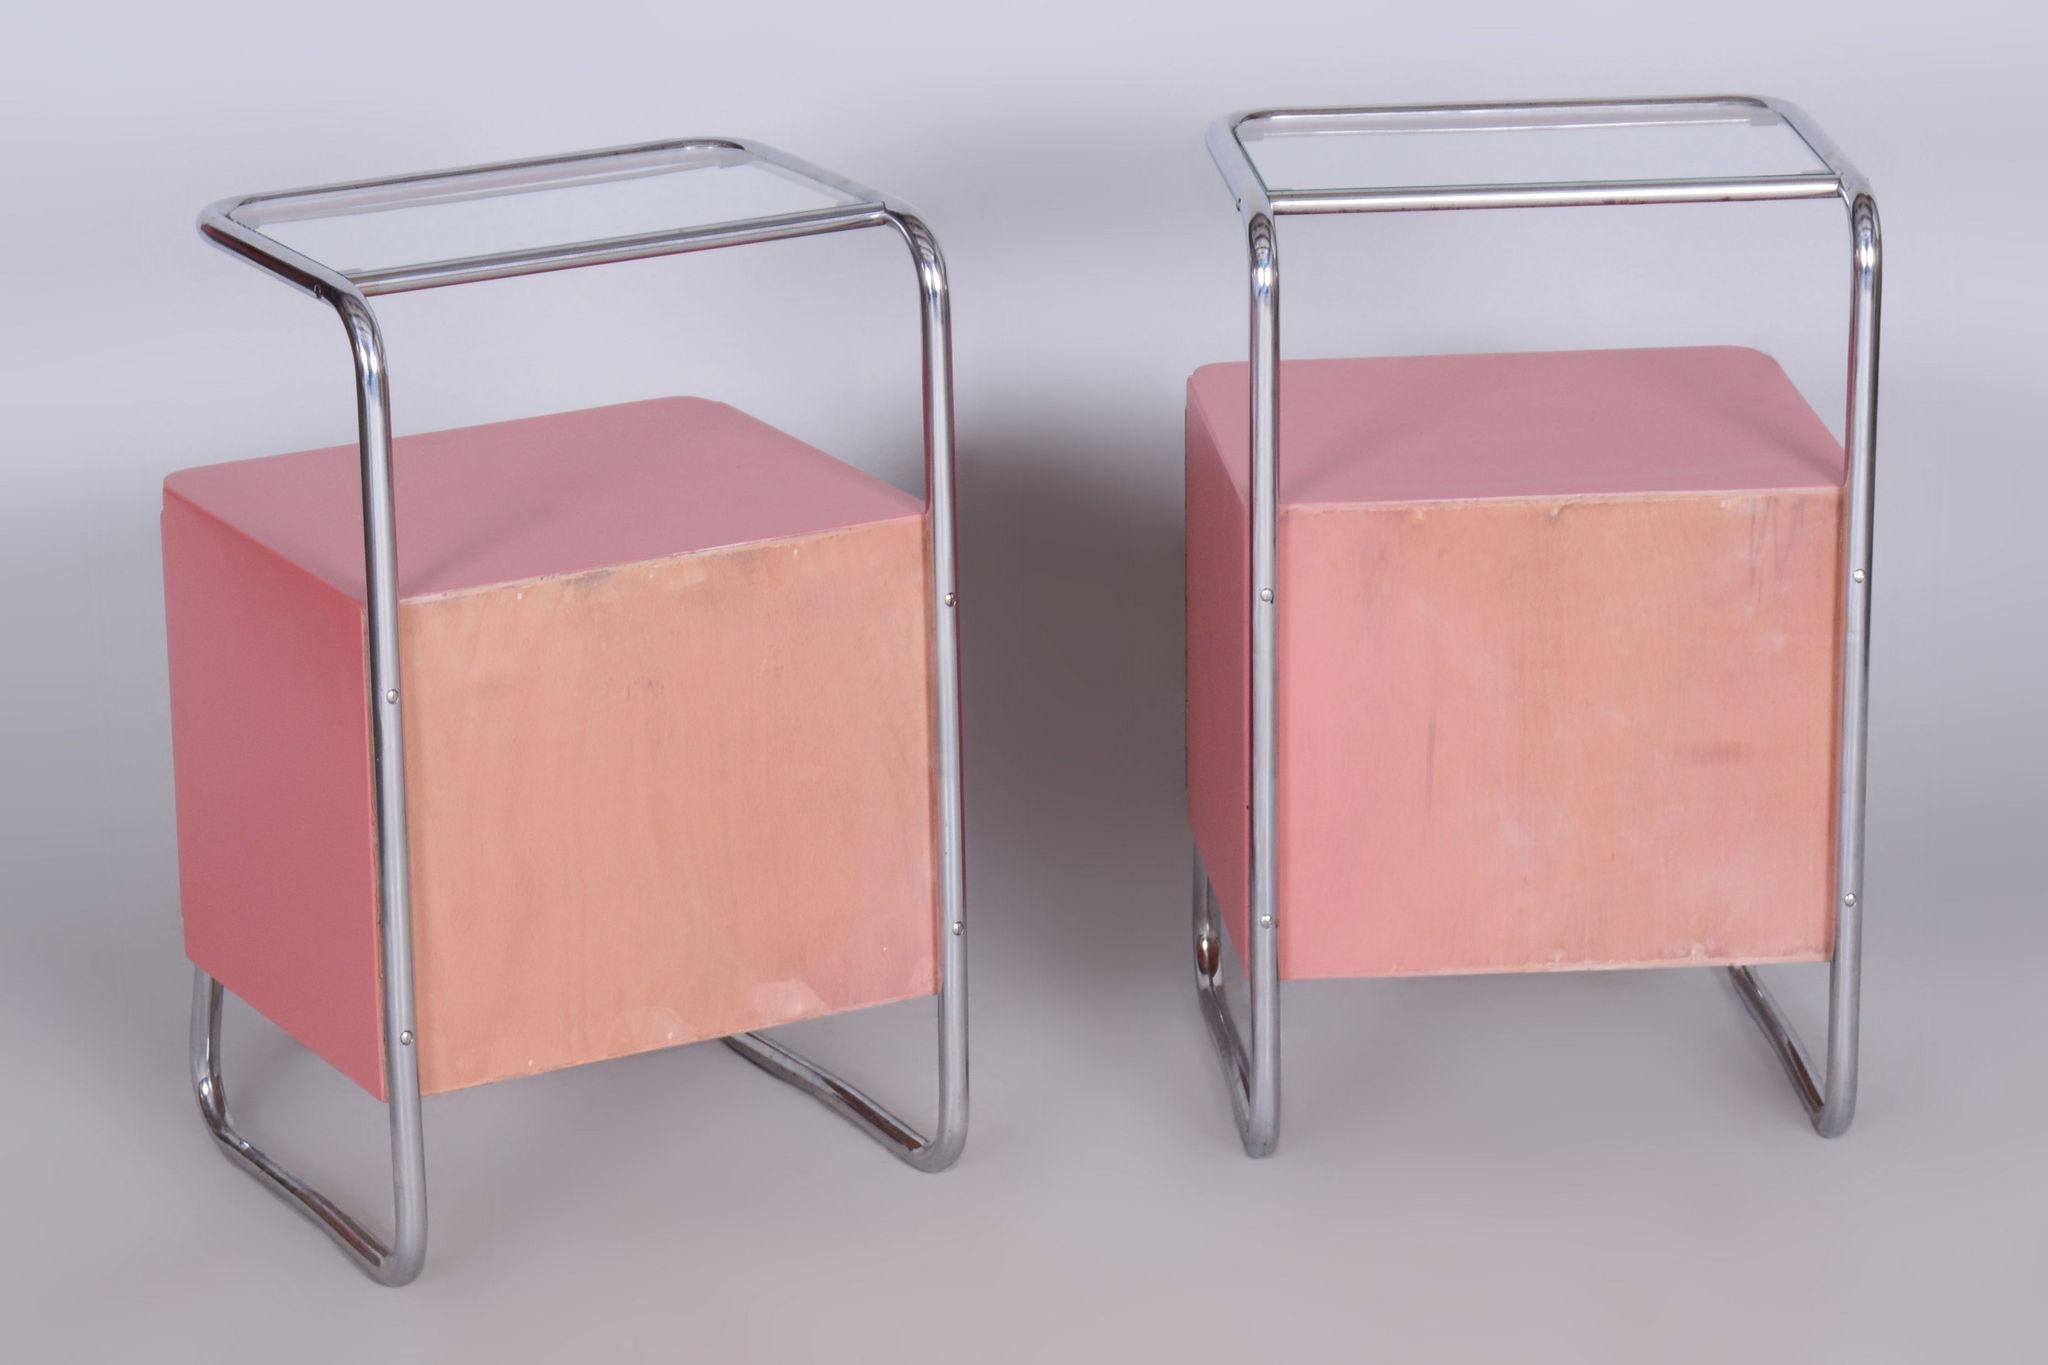 Restored Bauhaus Pair of Bed-Side Tables.

Period: 1940-1949
Source: Czechia (Czechoslovakia)
Material: Chrome-Plated Steel, Clear Glass, Lacquered Wood

New glass.
New pink lacquer was made according to the original model.

Our professional